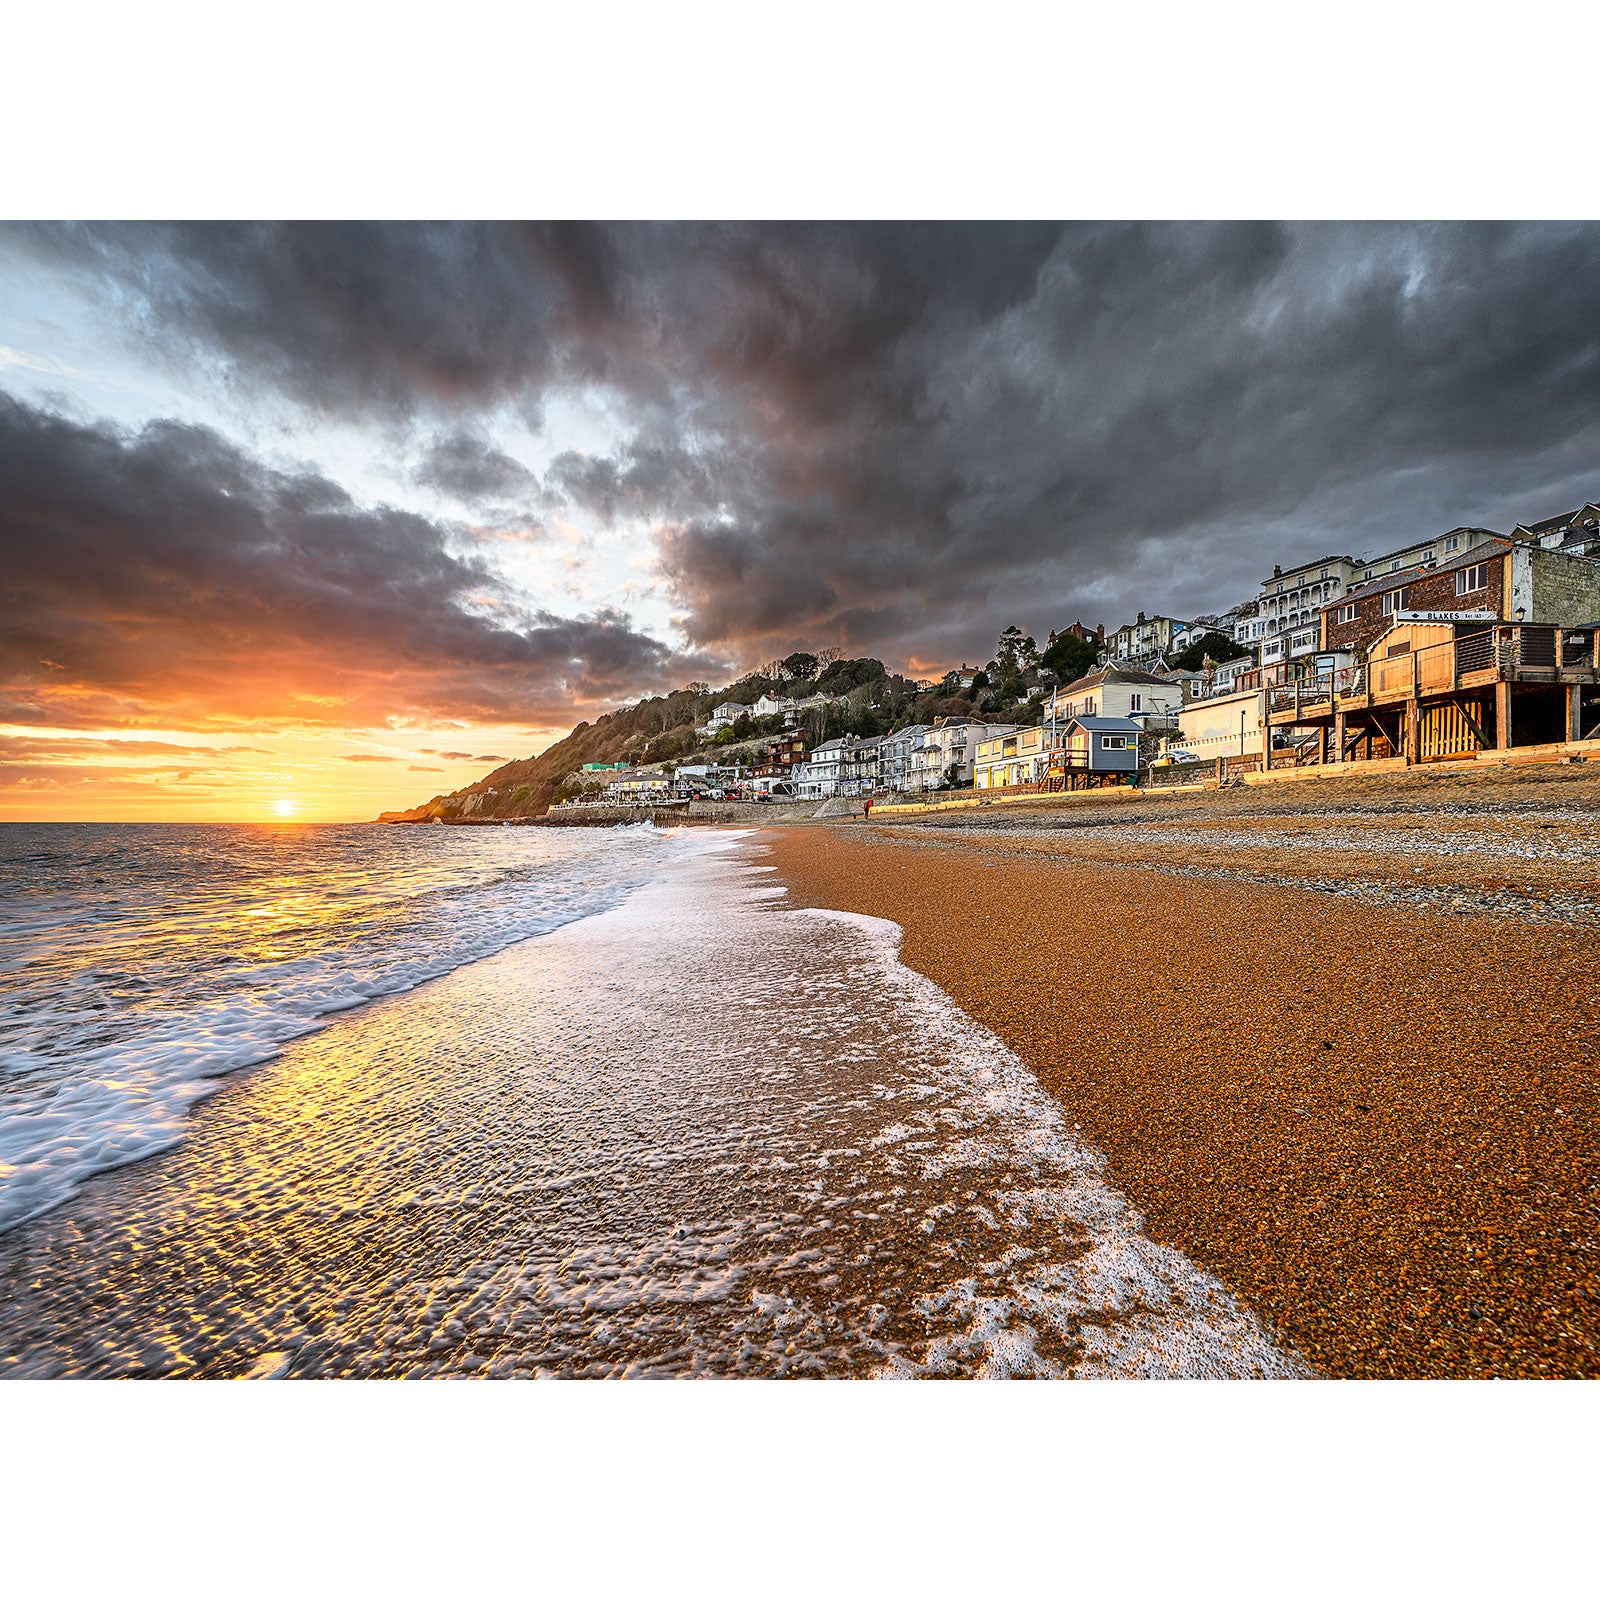 Sunset at a pebble beach on the Isle of Ventnor with a coastal town in the background and dramatic clouds overhead, captured by Available Light Photography.